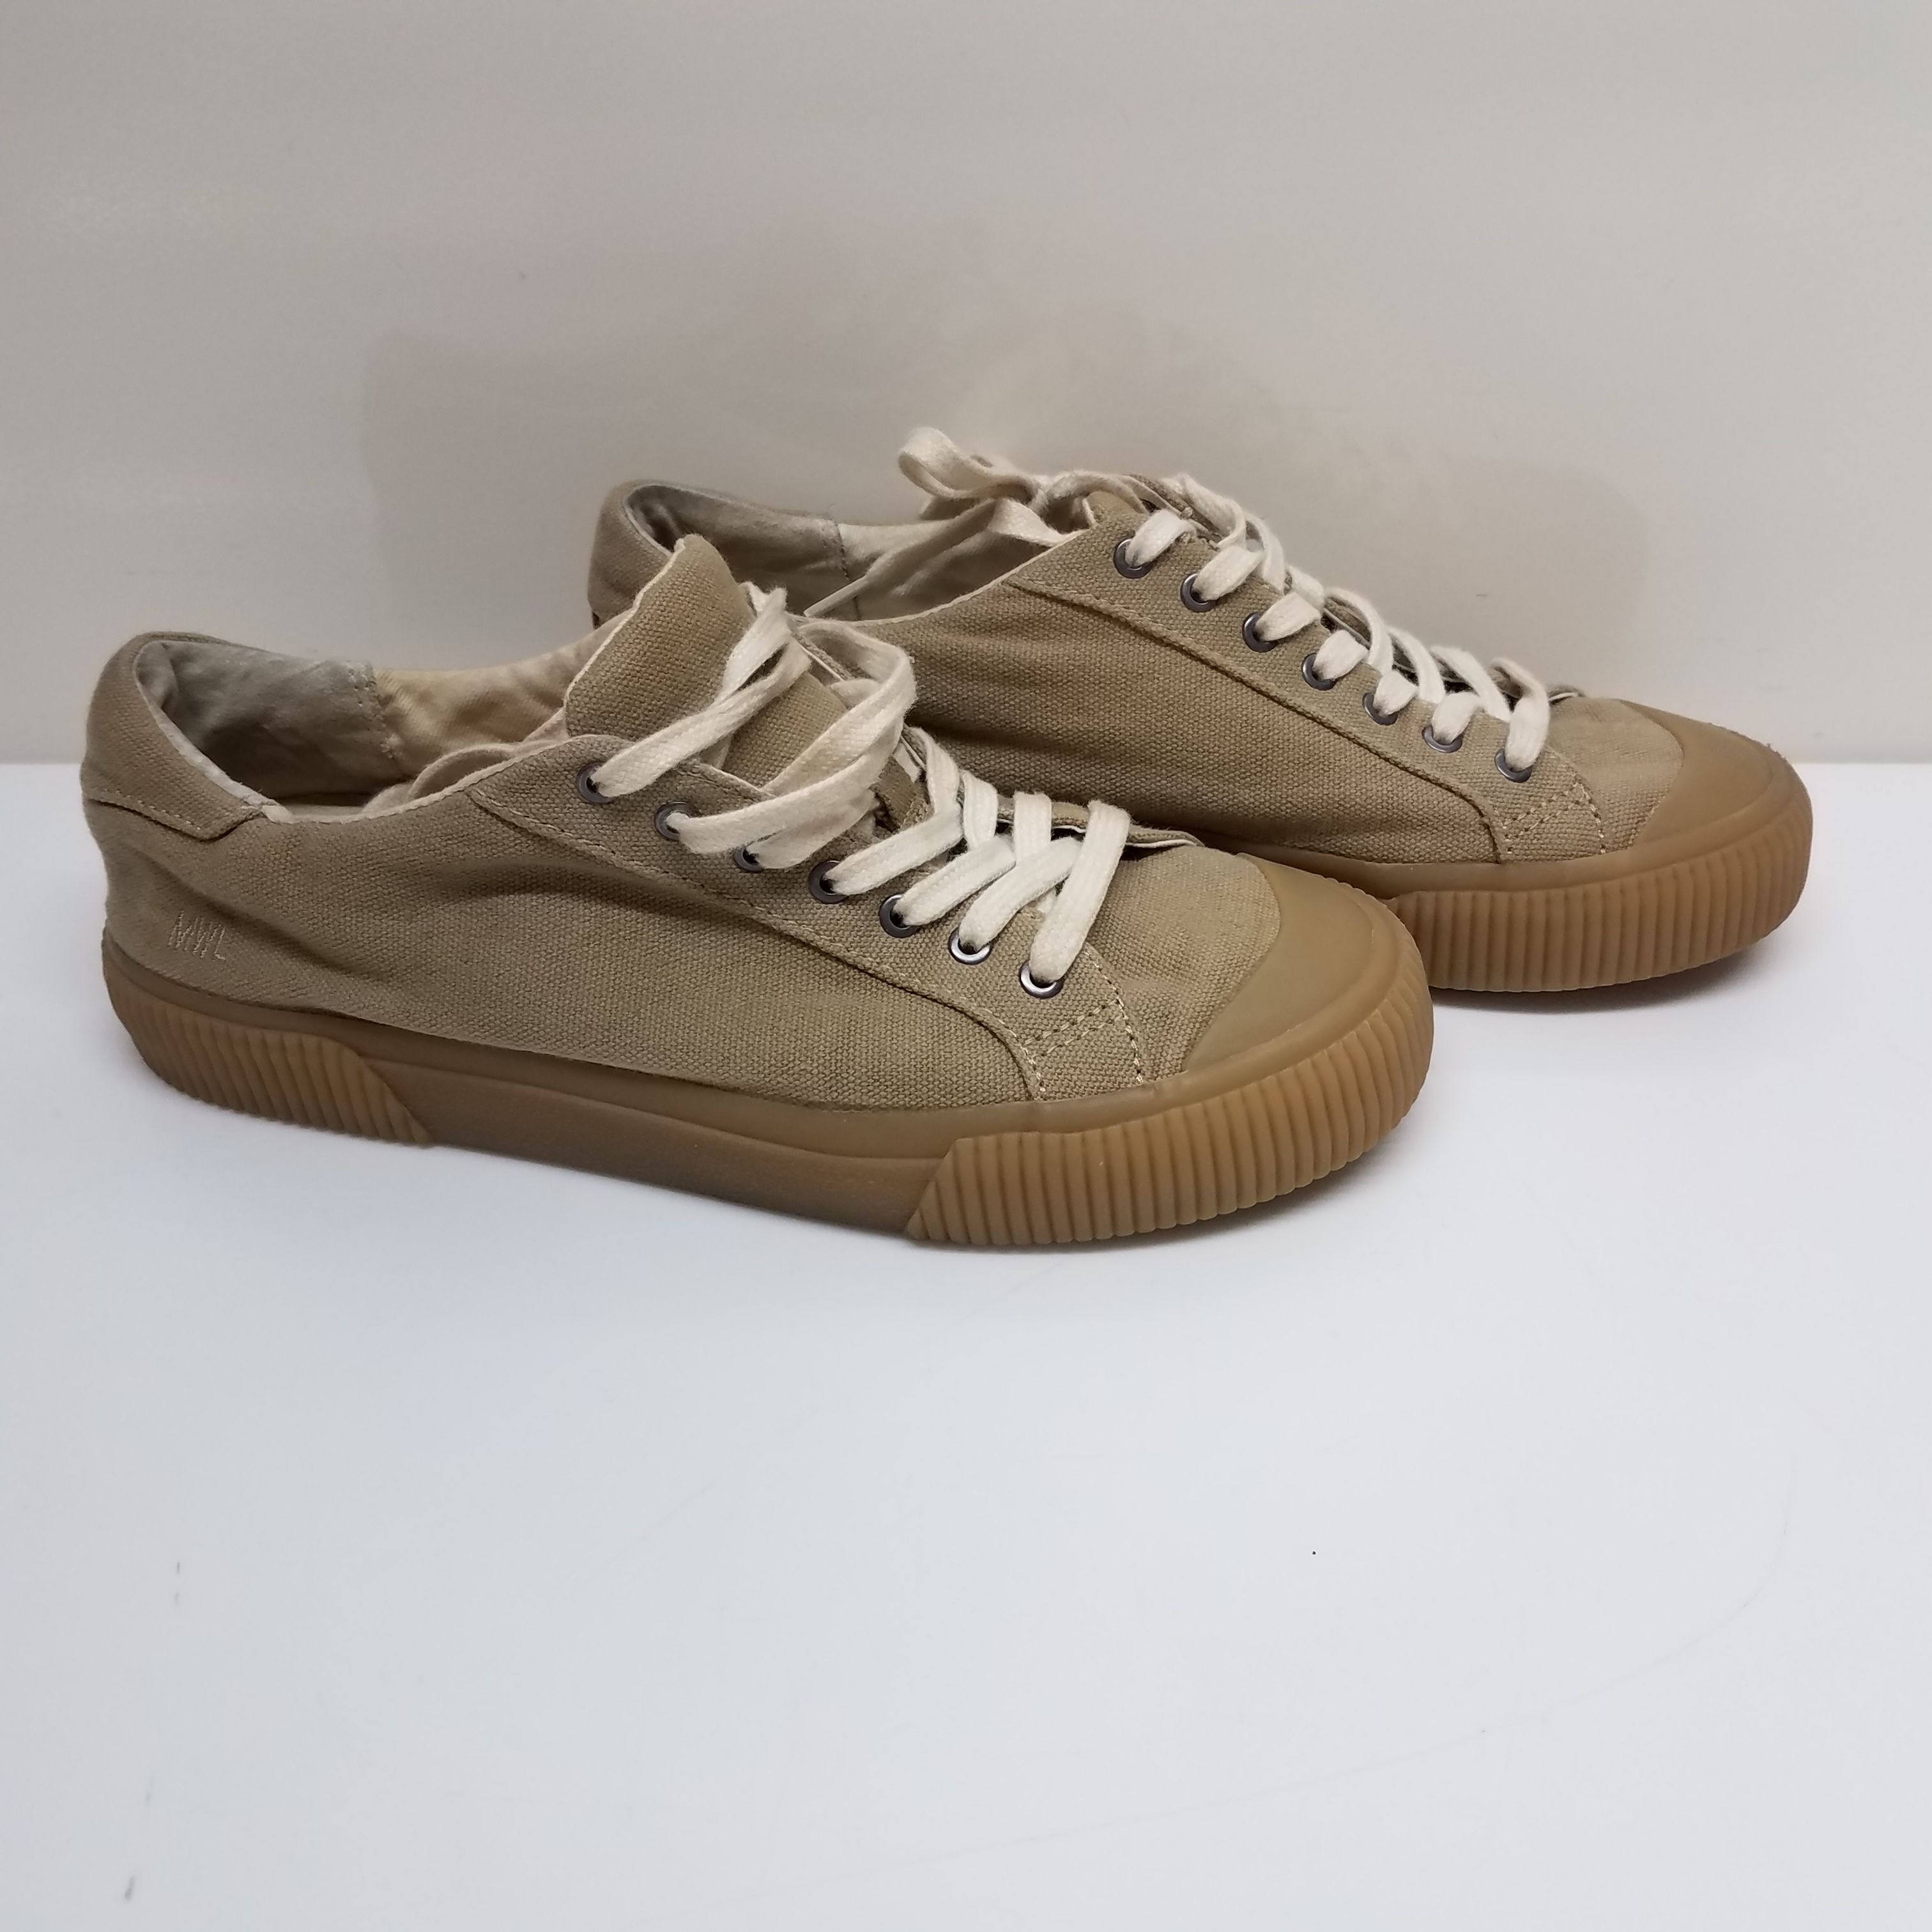 Buy the Madewell Tan Tennis Shoes | GoodwillFinds